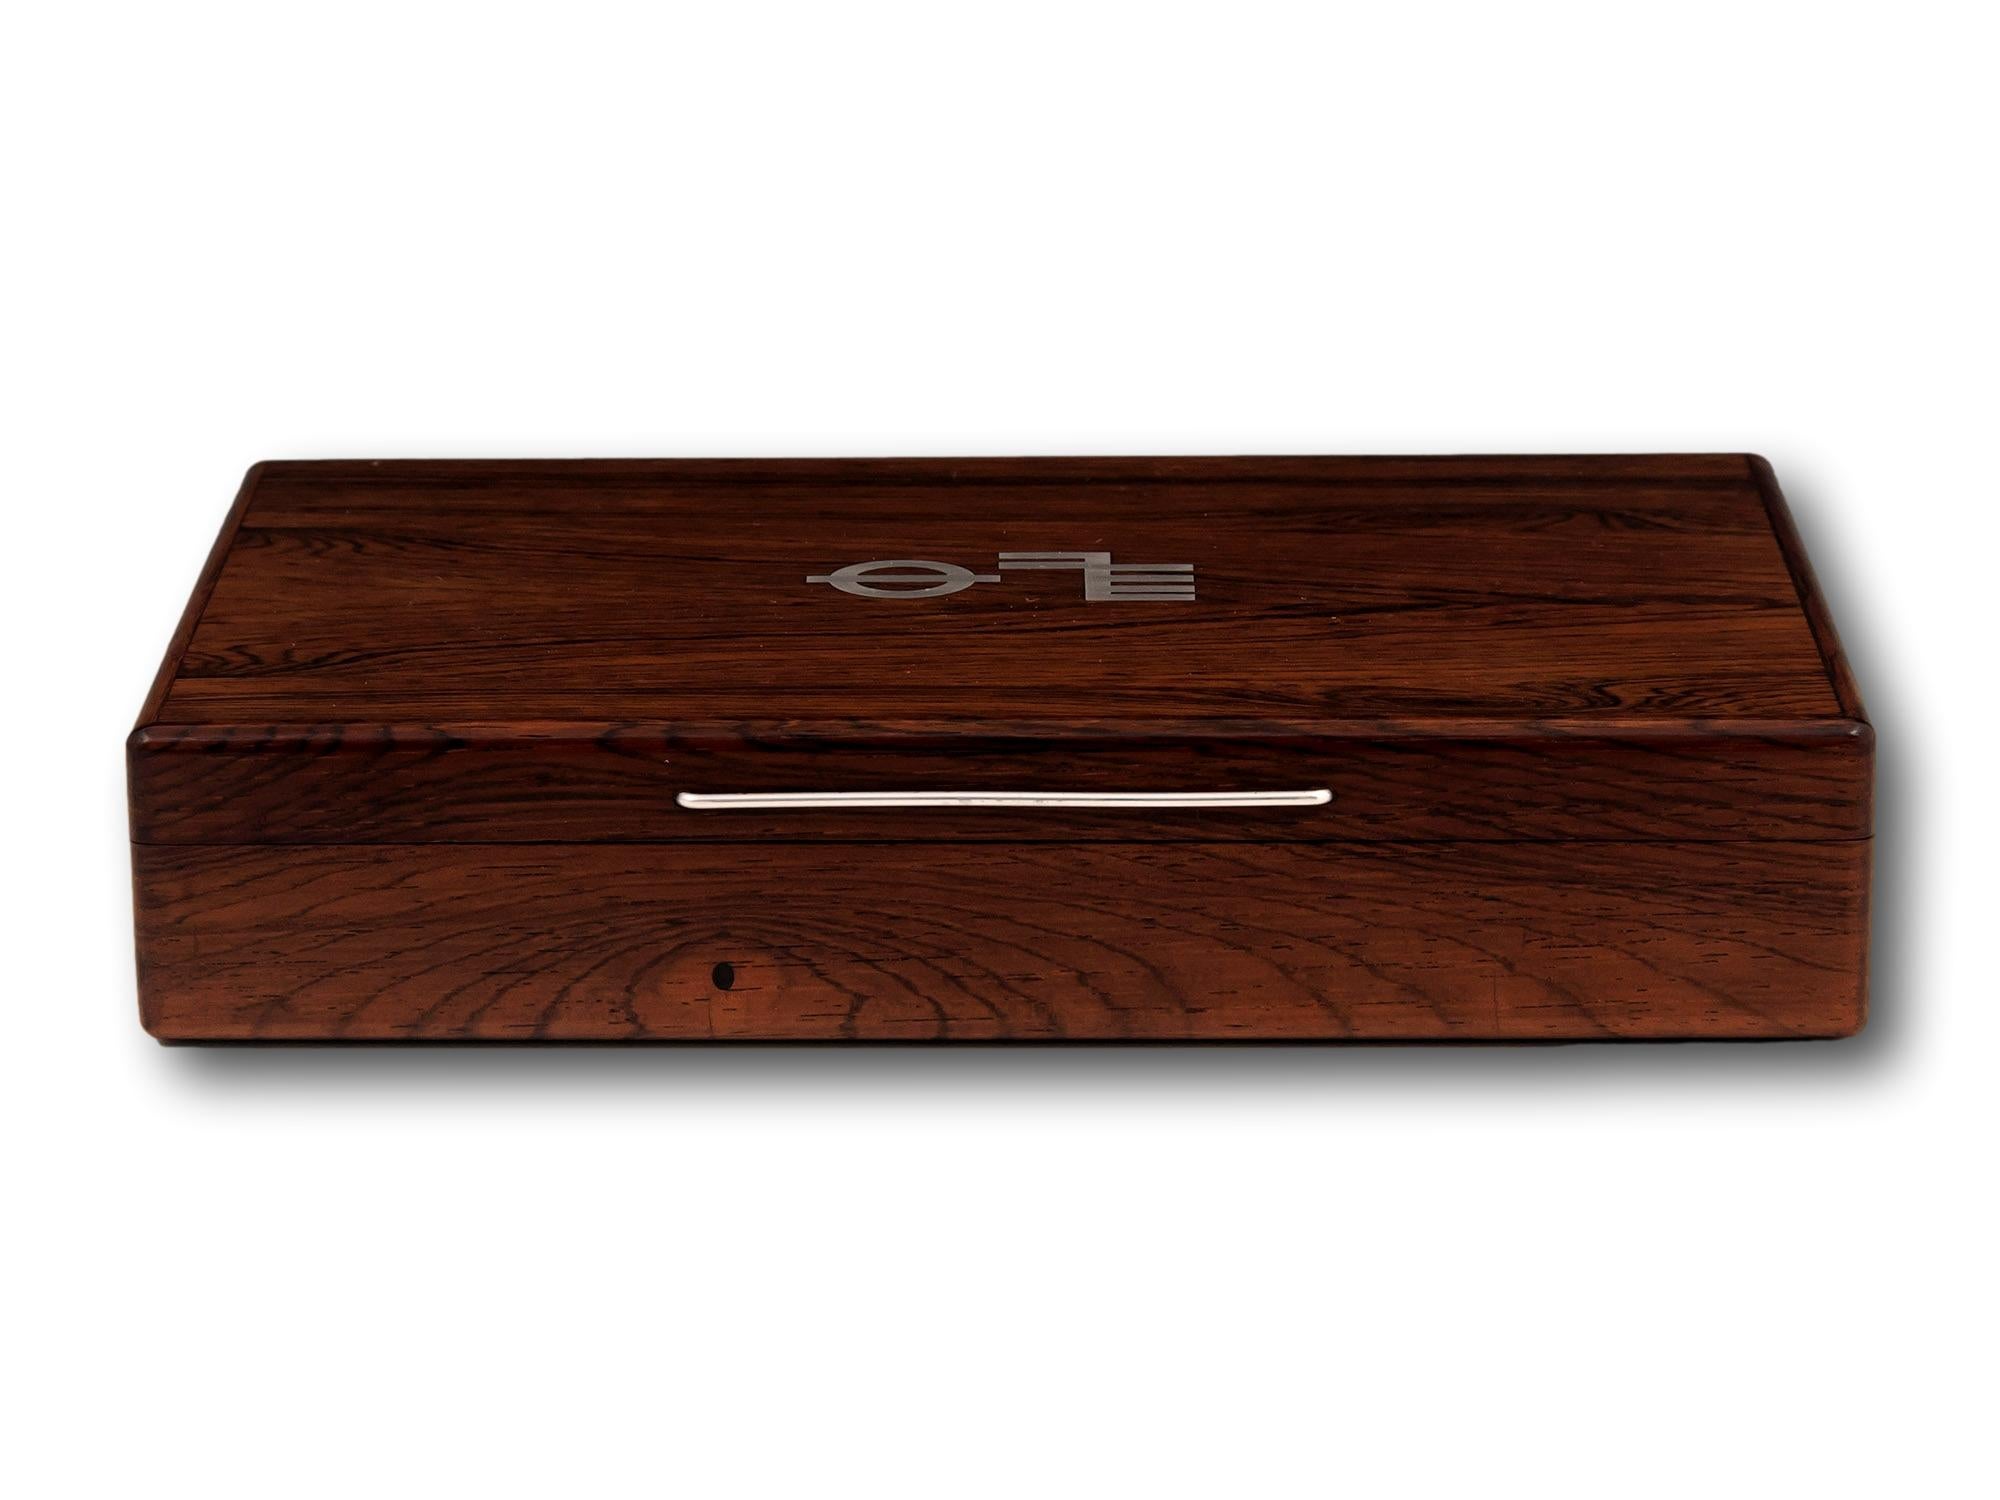 Inlaid with Plimsoll Line Symbol 

From our Boxes collection, we are pleased to offer this Mid-Century Modern Rosewood Cigar Box. The Box of slim rectangular form made from solid Rosewood with a Silver thumb tab and hinge with a central Plimsoll